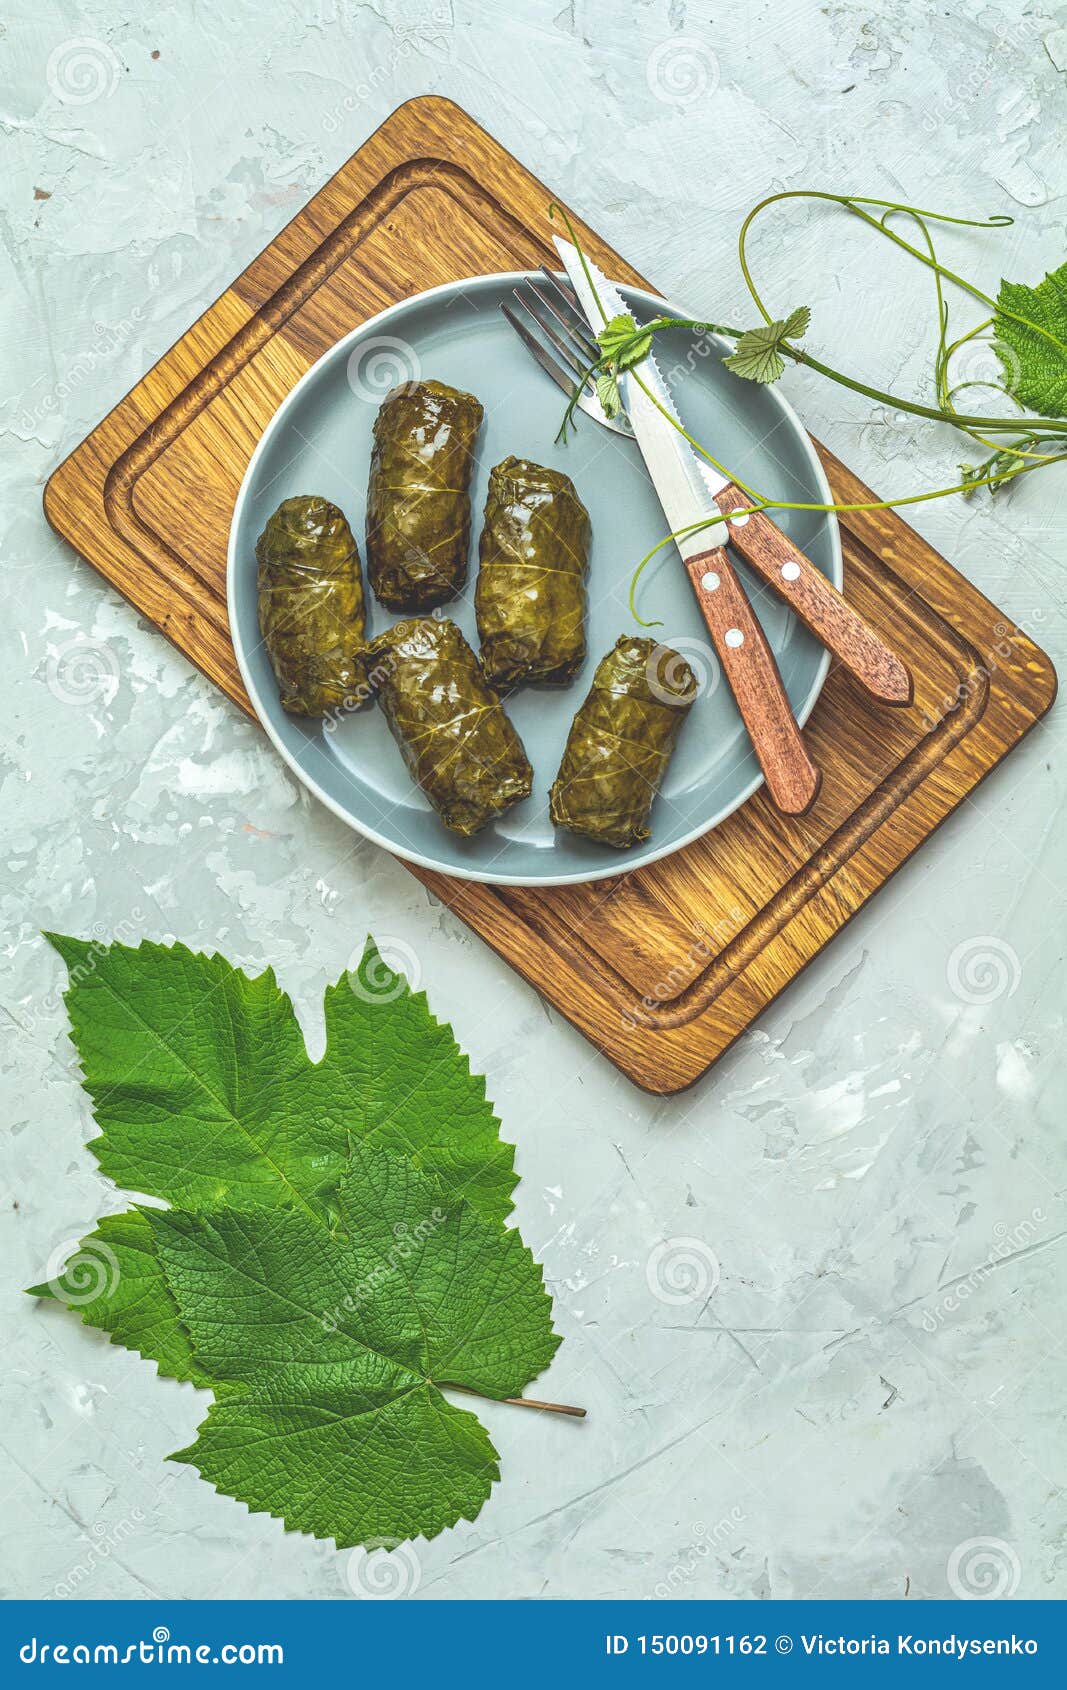 grape leaves stuffed with meat and rice